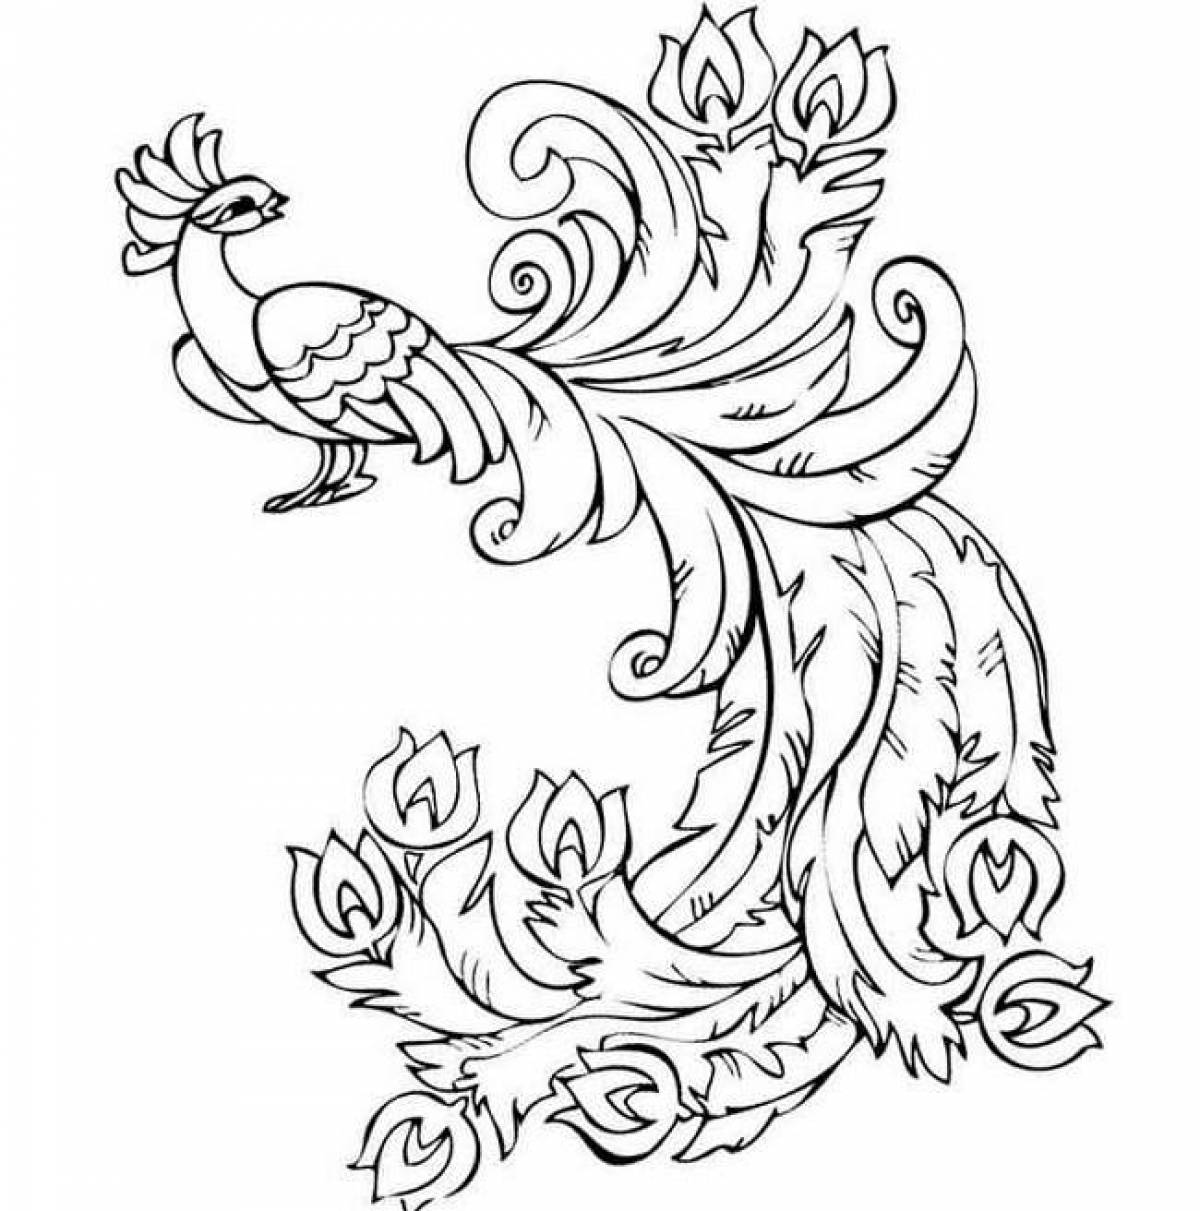 Fabulous firebird coloring pages for kids